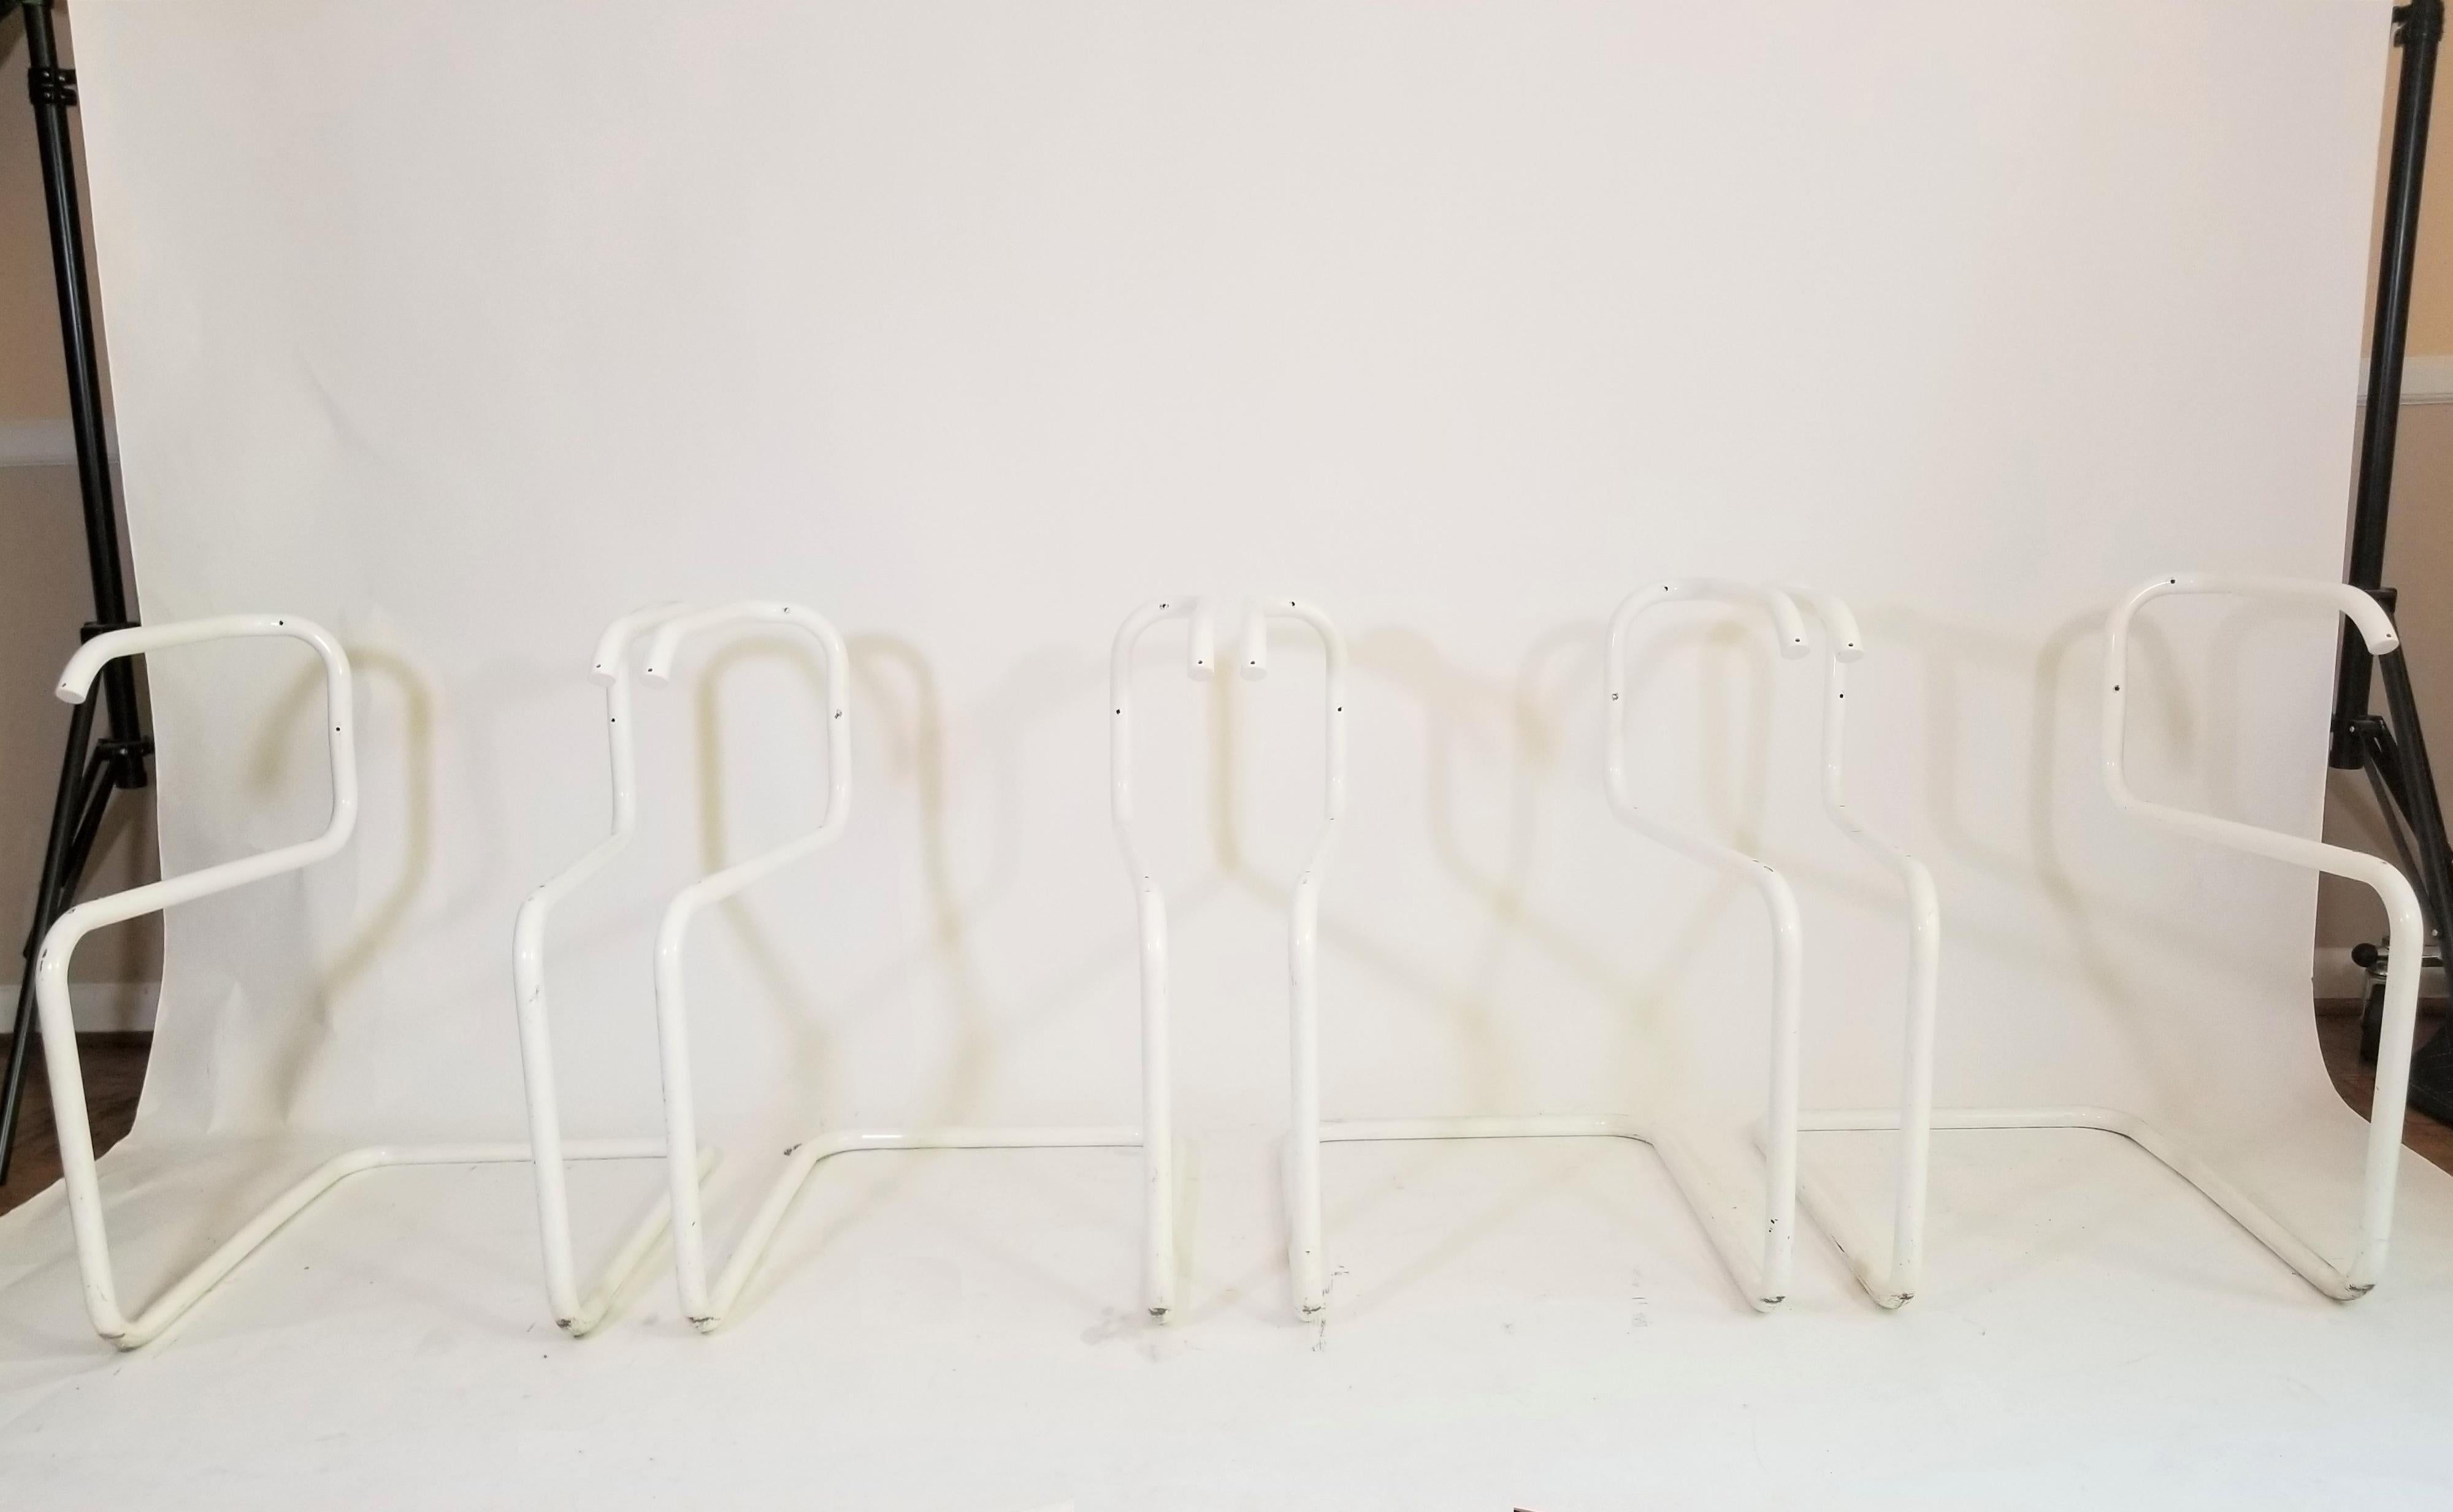 Purchased directly from a retired Designer for Knoll. Rare white powder coating on these Classic Marcel Breuer Cesca Chairs. White powder coating was used on a very limited amount of chairs in the early 1980s. Set of 4. Classic cane seats and backs